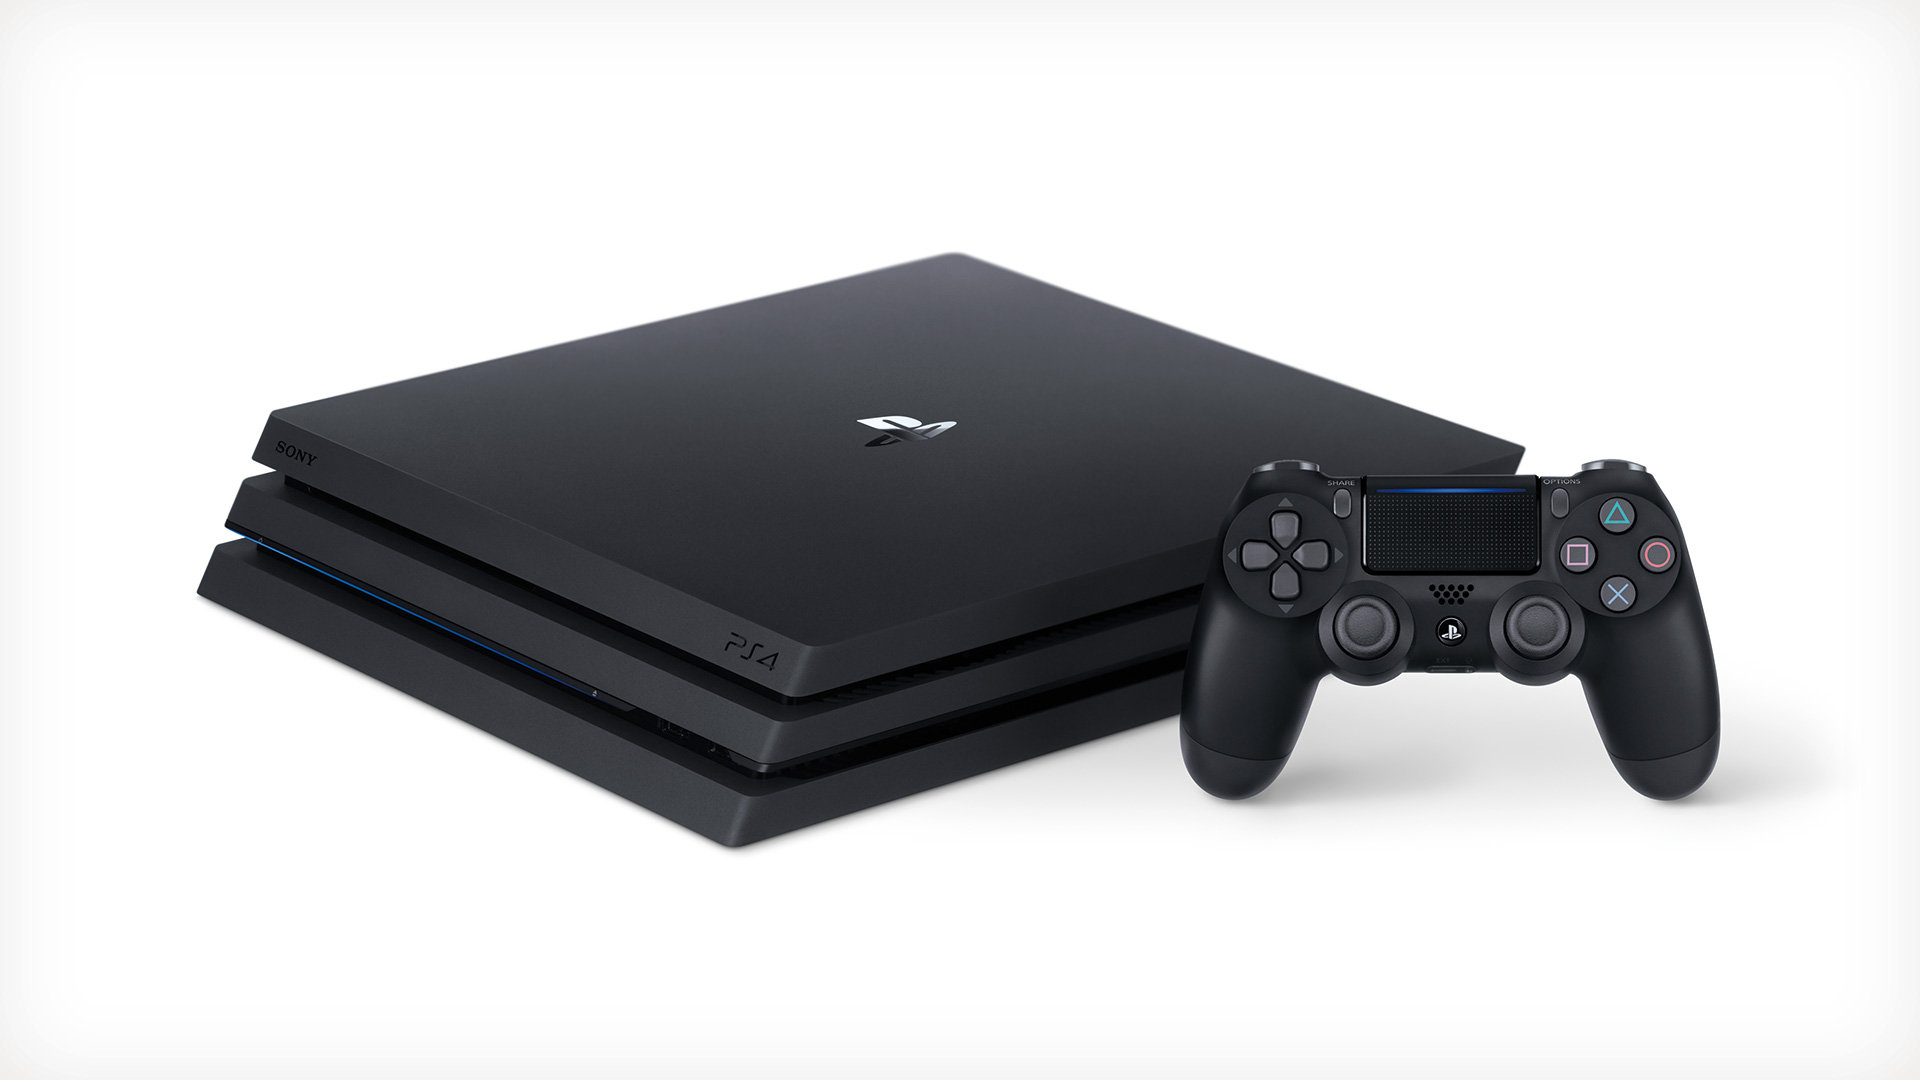 The first upgrade you should make to the PS4 Pro